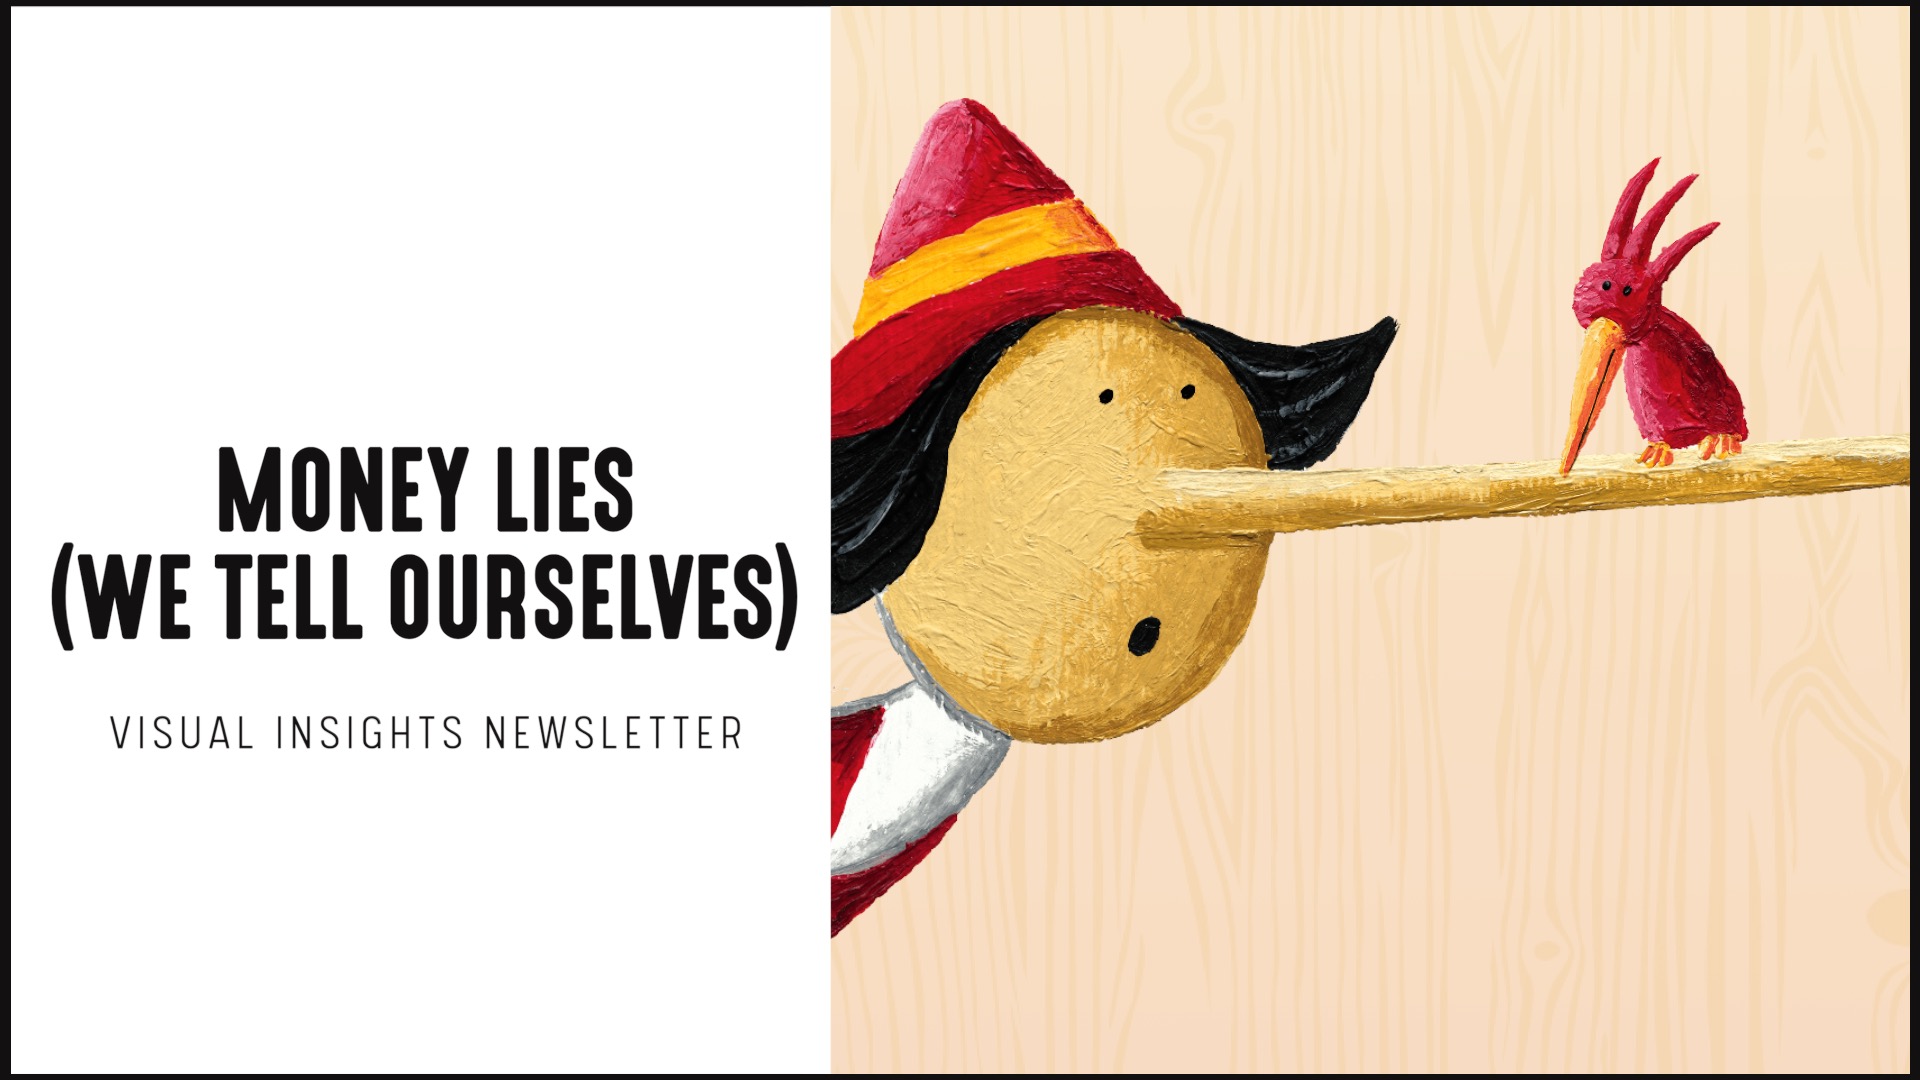 [NEW] Visual Insights Newsletter | Money Lies (We Tell Ourselves)